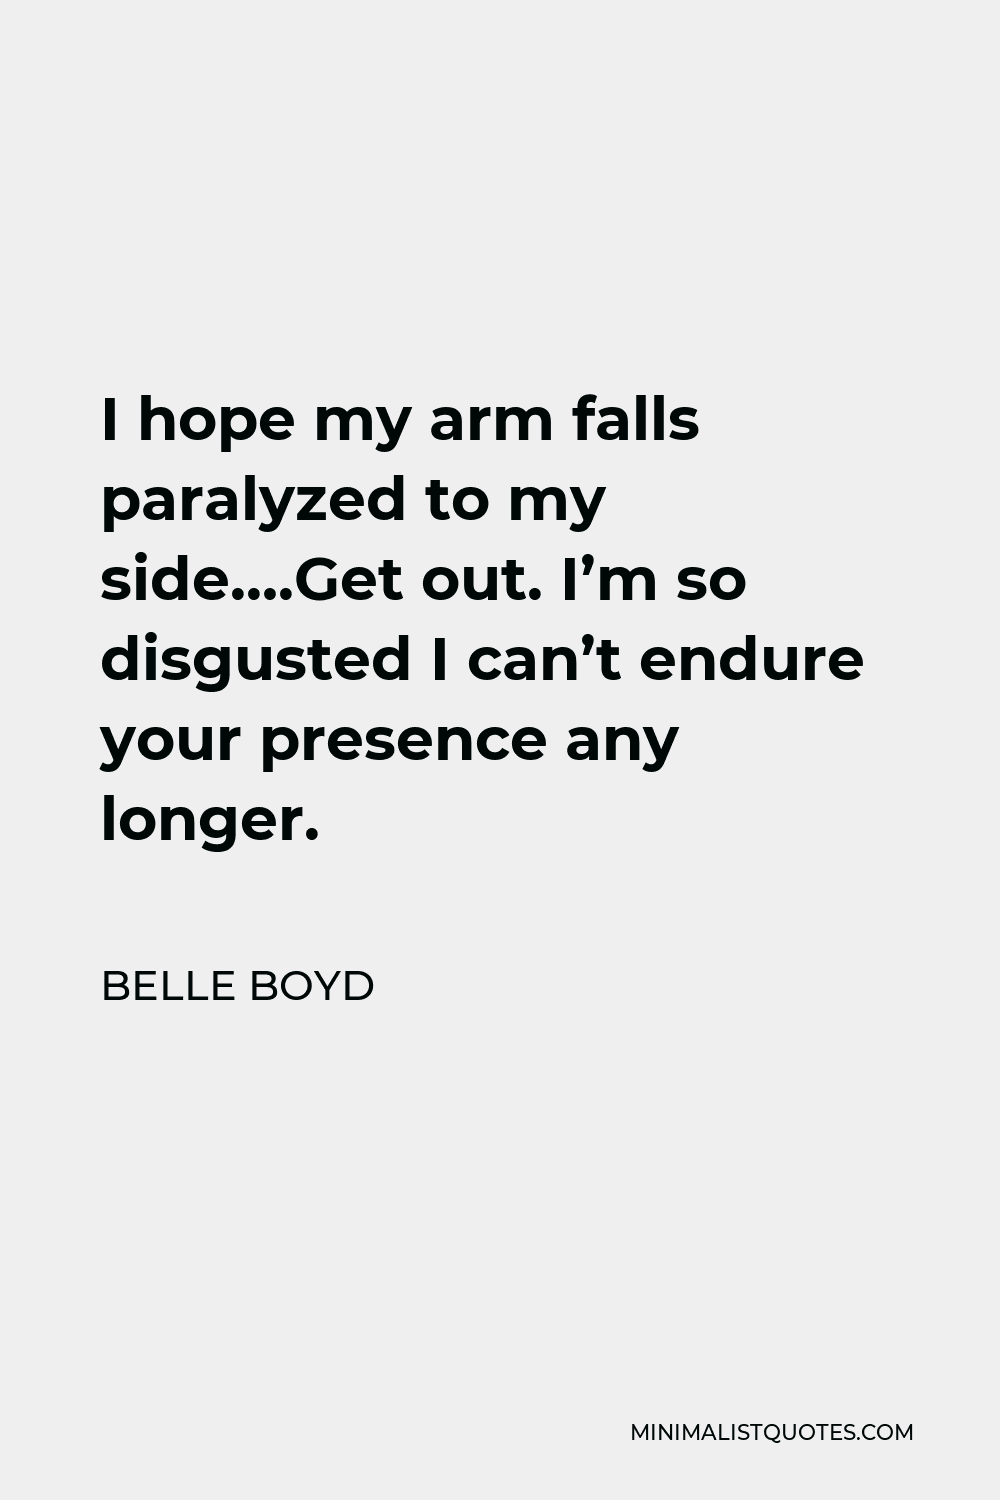 Belle Boyd Quote - I hope my arm falls paralyzed to my side….Get out. I’m so disgusted I can’t endure your presence any longer.